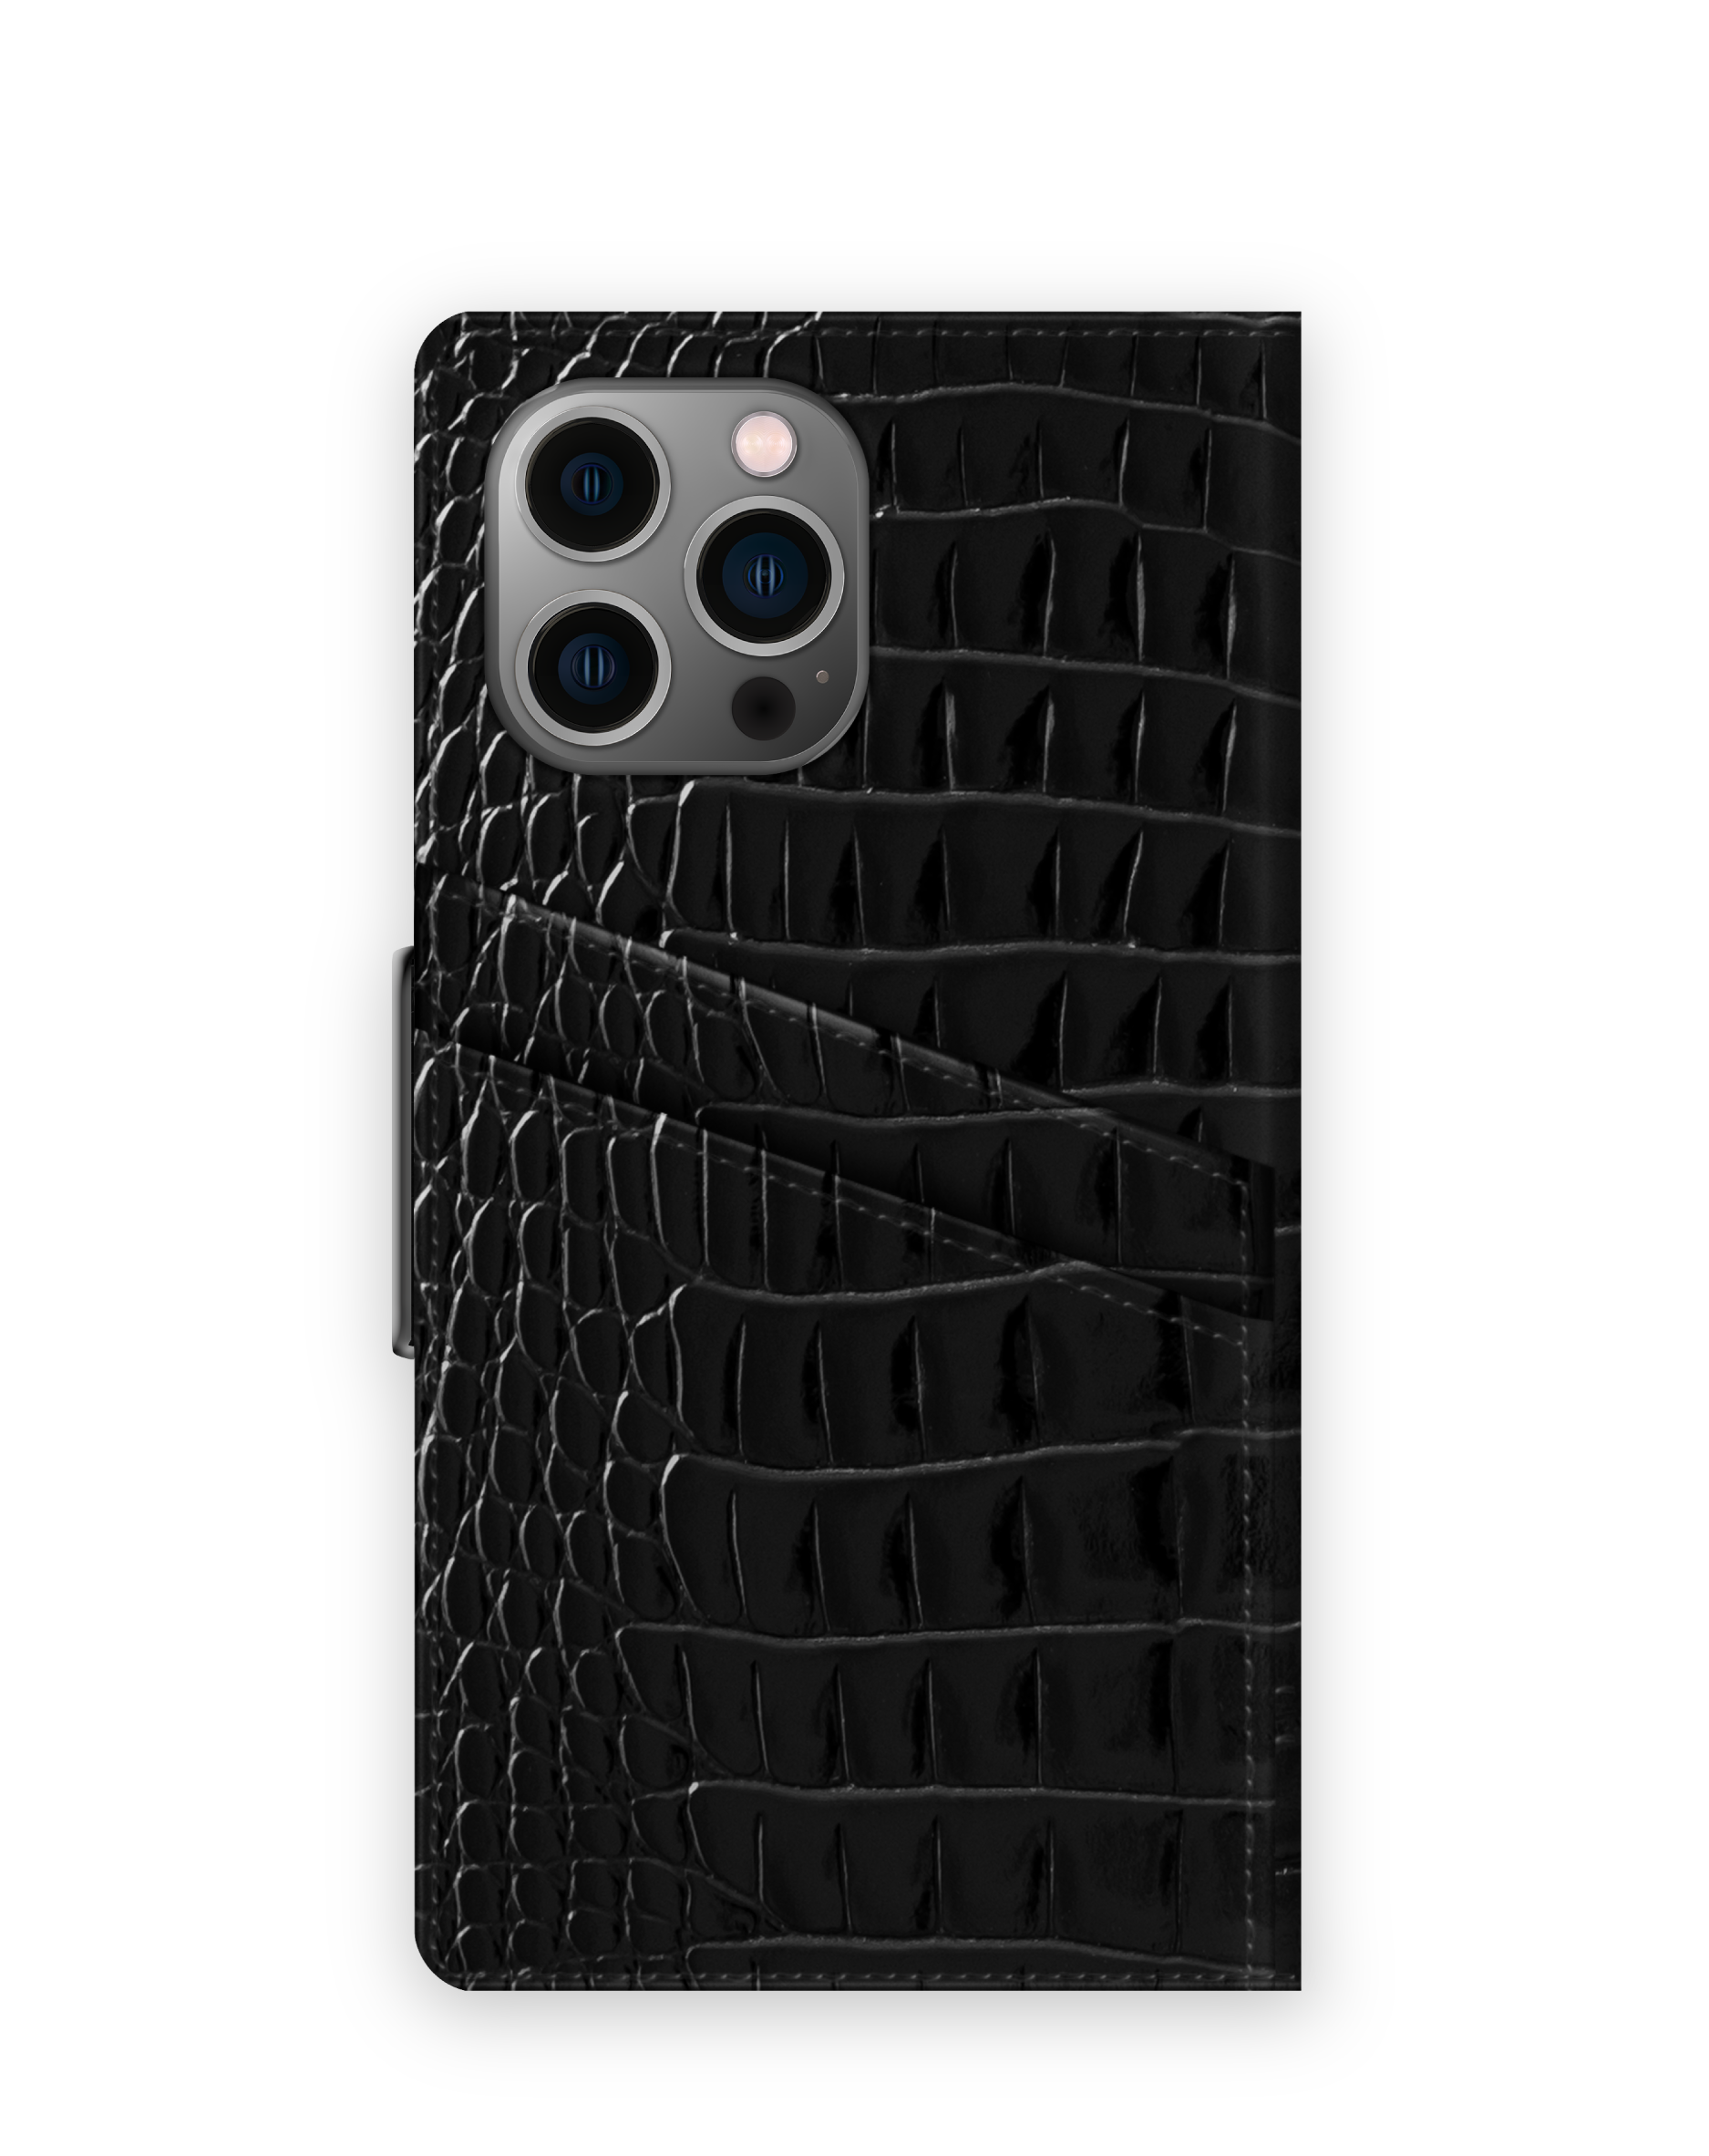 Noir Max, iPhone 13 Bookcover, OF Pro IDAW-I2167-236, SWEDEN Apple, Croco Neo IDEAL